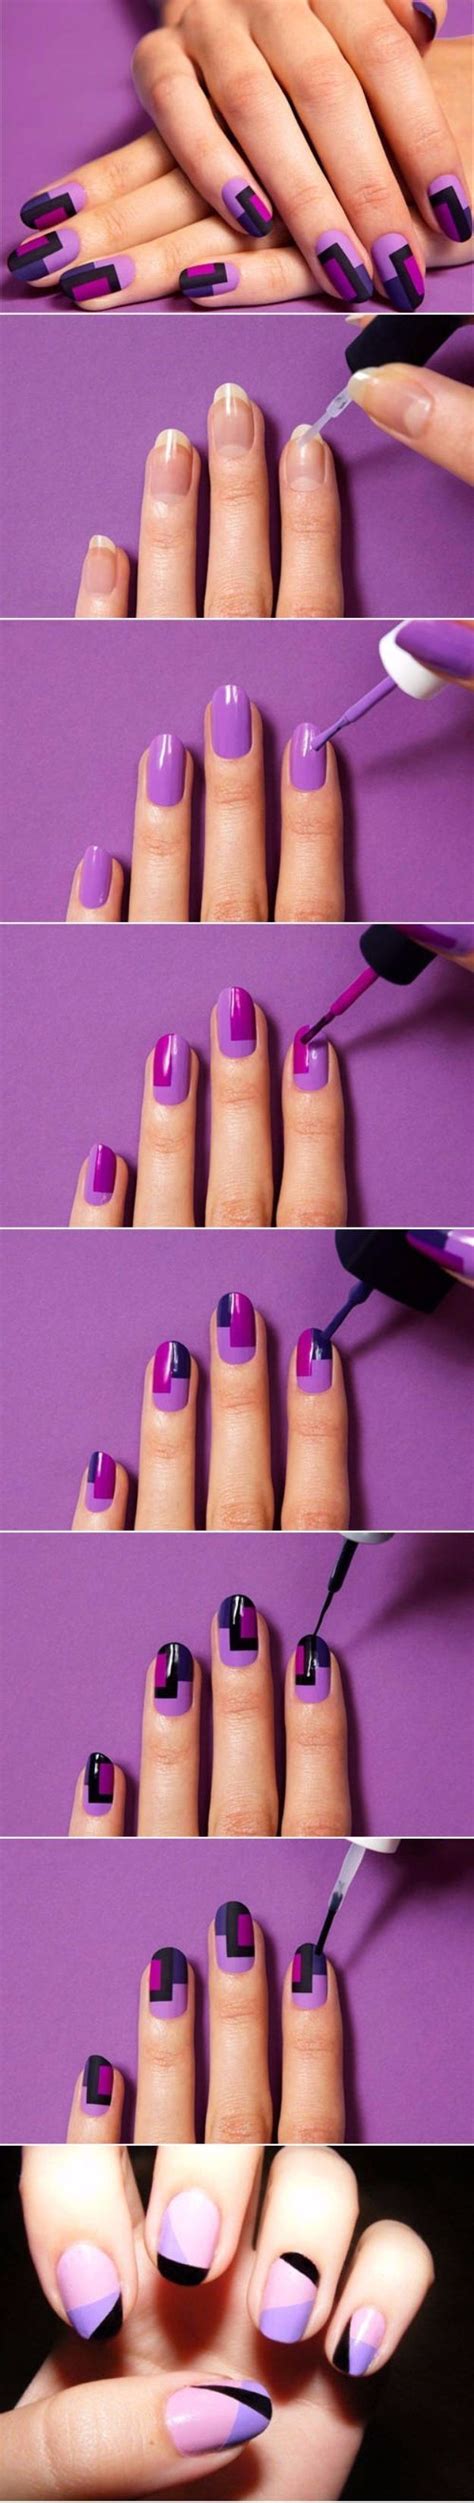 Quick Nail Art Ideas Easy Step By Step Diy Nail Designs With Tutorials And Instructions